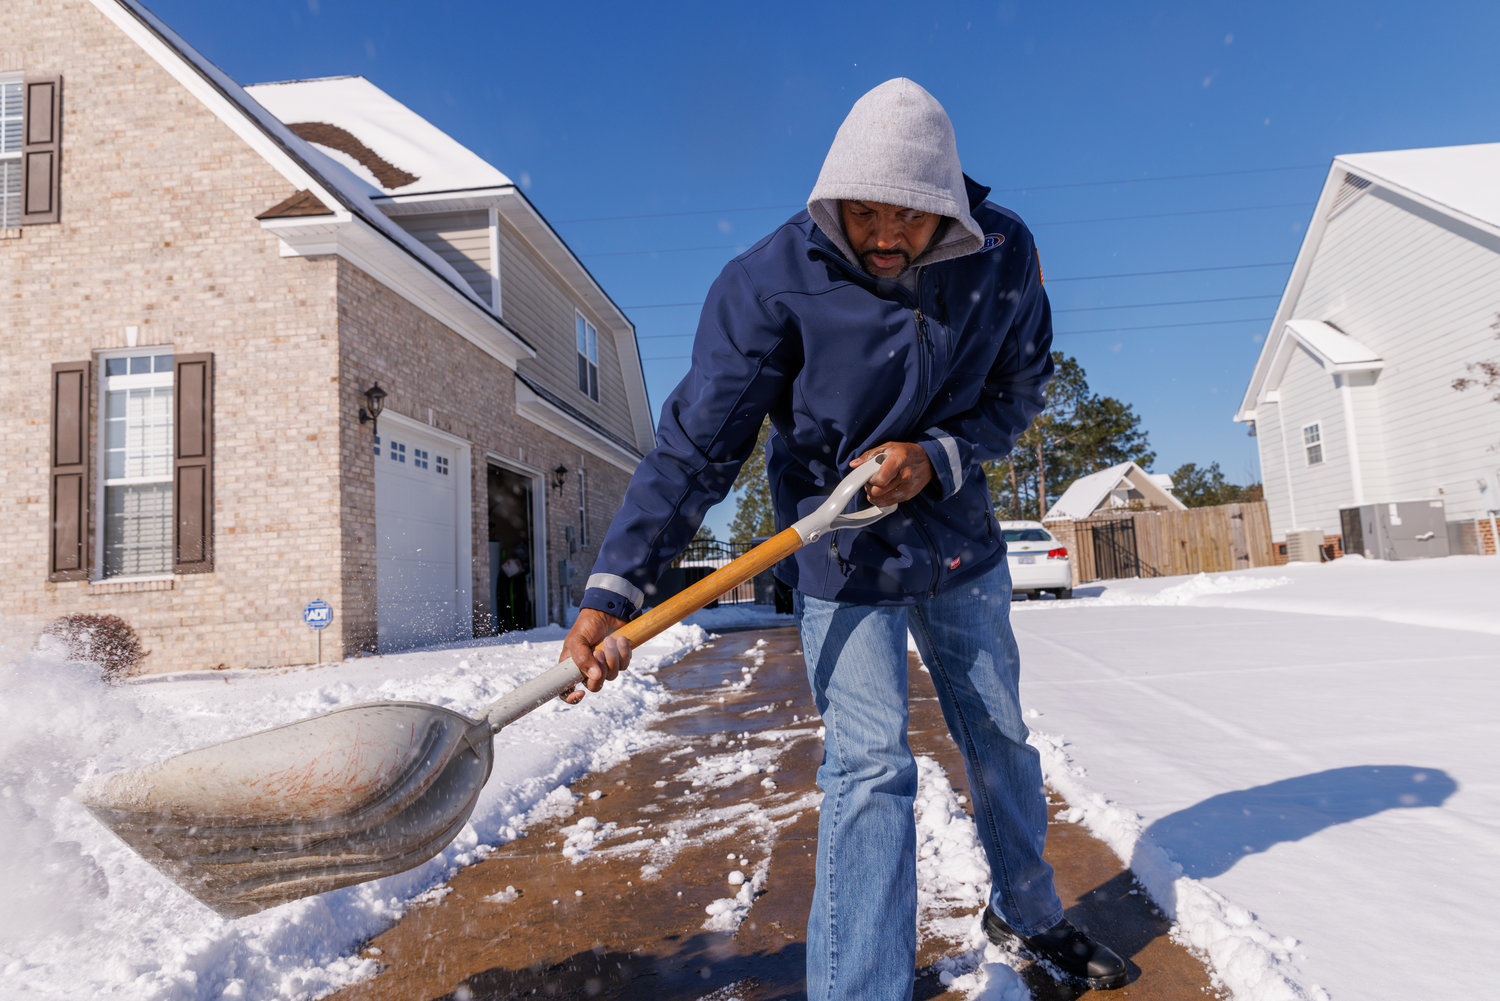 Darick Stevens shovels snow from his driveway in Hope Mills on Saturday. A winter storm brought 4 inches of snow to Hope Mills, the National Weather Service said.